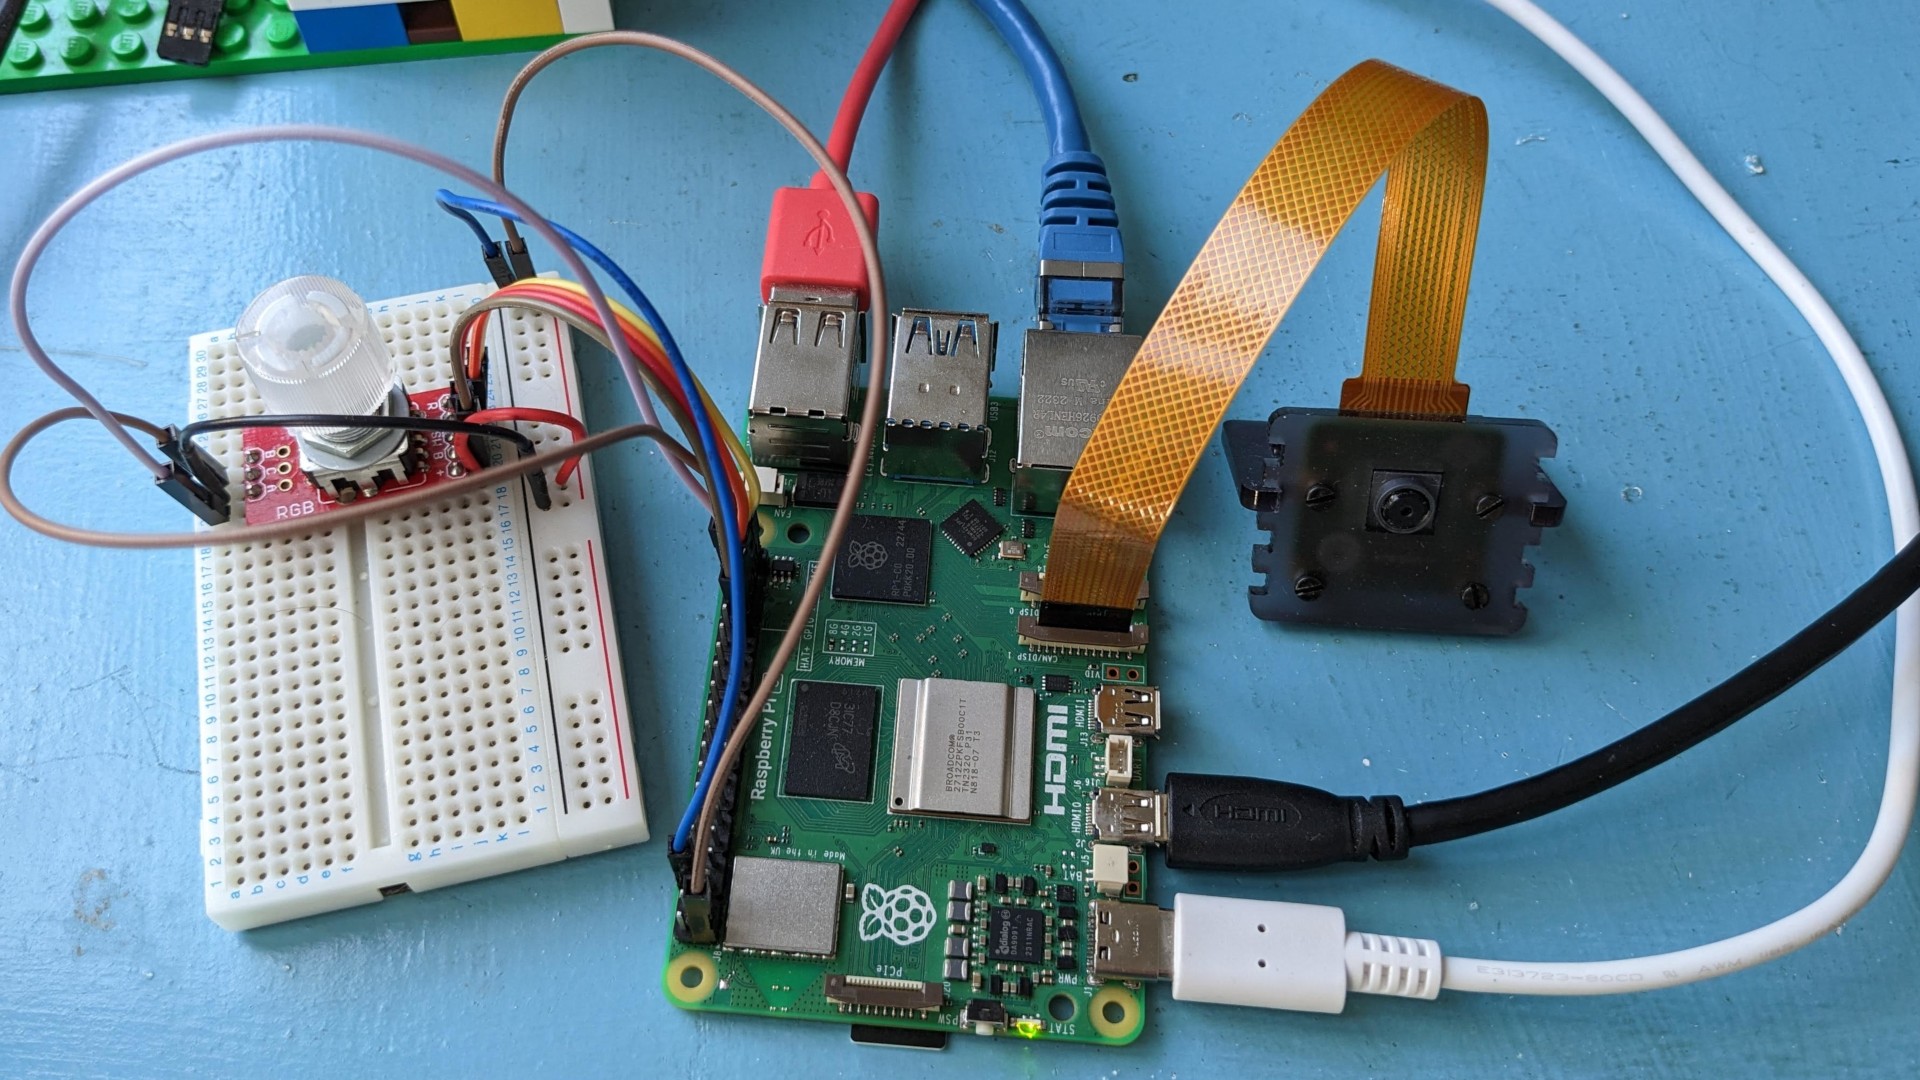 A Raspberry Pi 5 sits on top of a blue-painted desk. Various cables (USB, ethernet, micro-HDMI, and USB-C power cable) are plugged into it, as well as a brown ribbon cable (FFC) leading to a Raspberry Pi camera module. To the left, various jumper leads trail from the GPIO header to a small breadboard containing a rotary encoder with an RGBLED embedded within it.